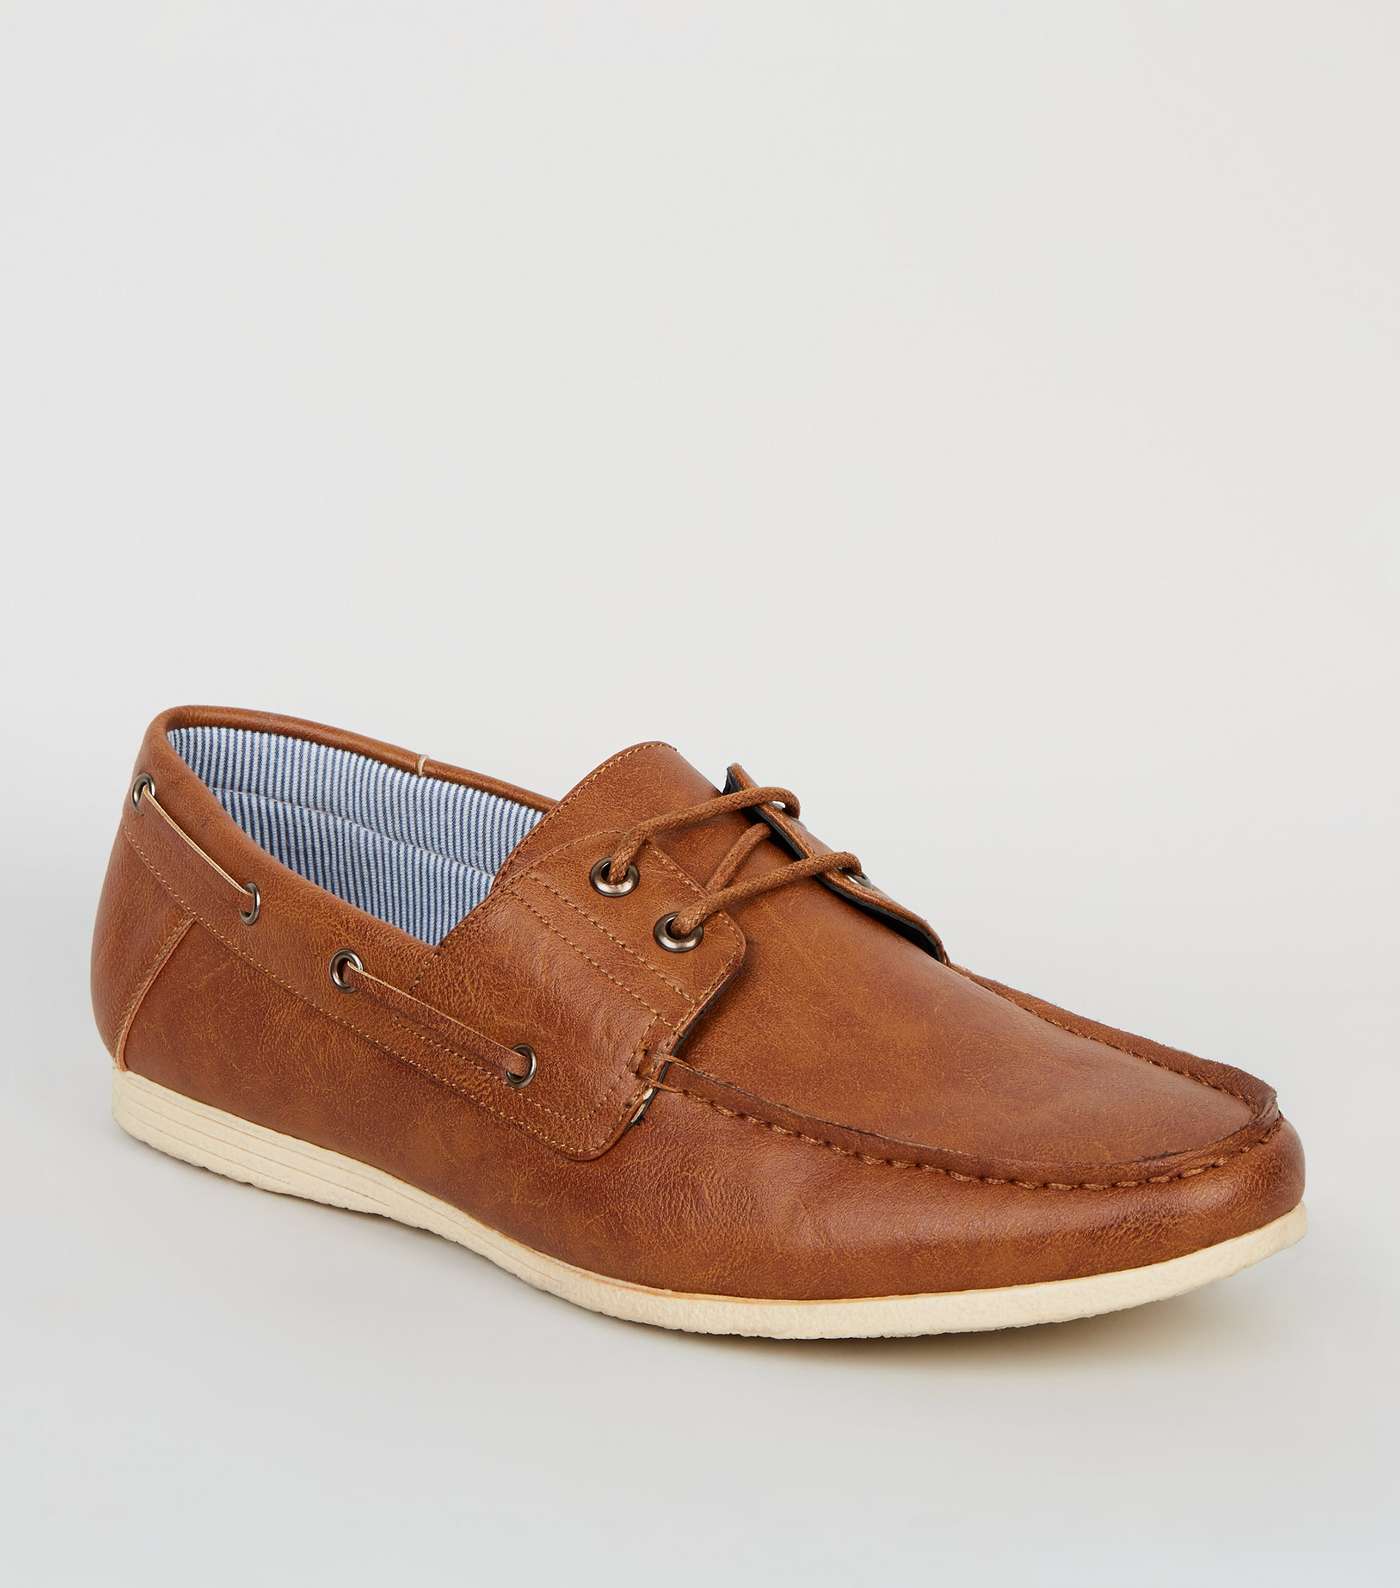 Tan Leather-Look Boat Shoes Image 2